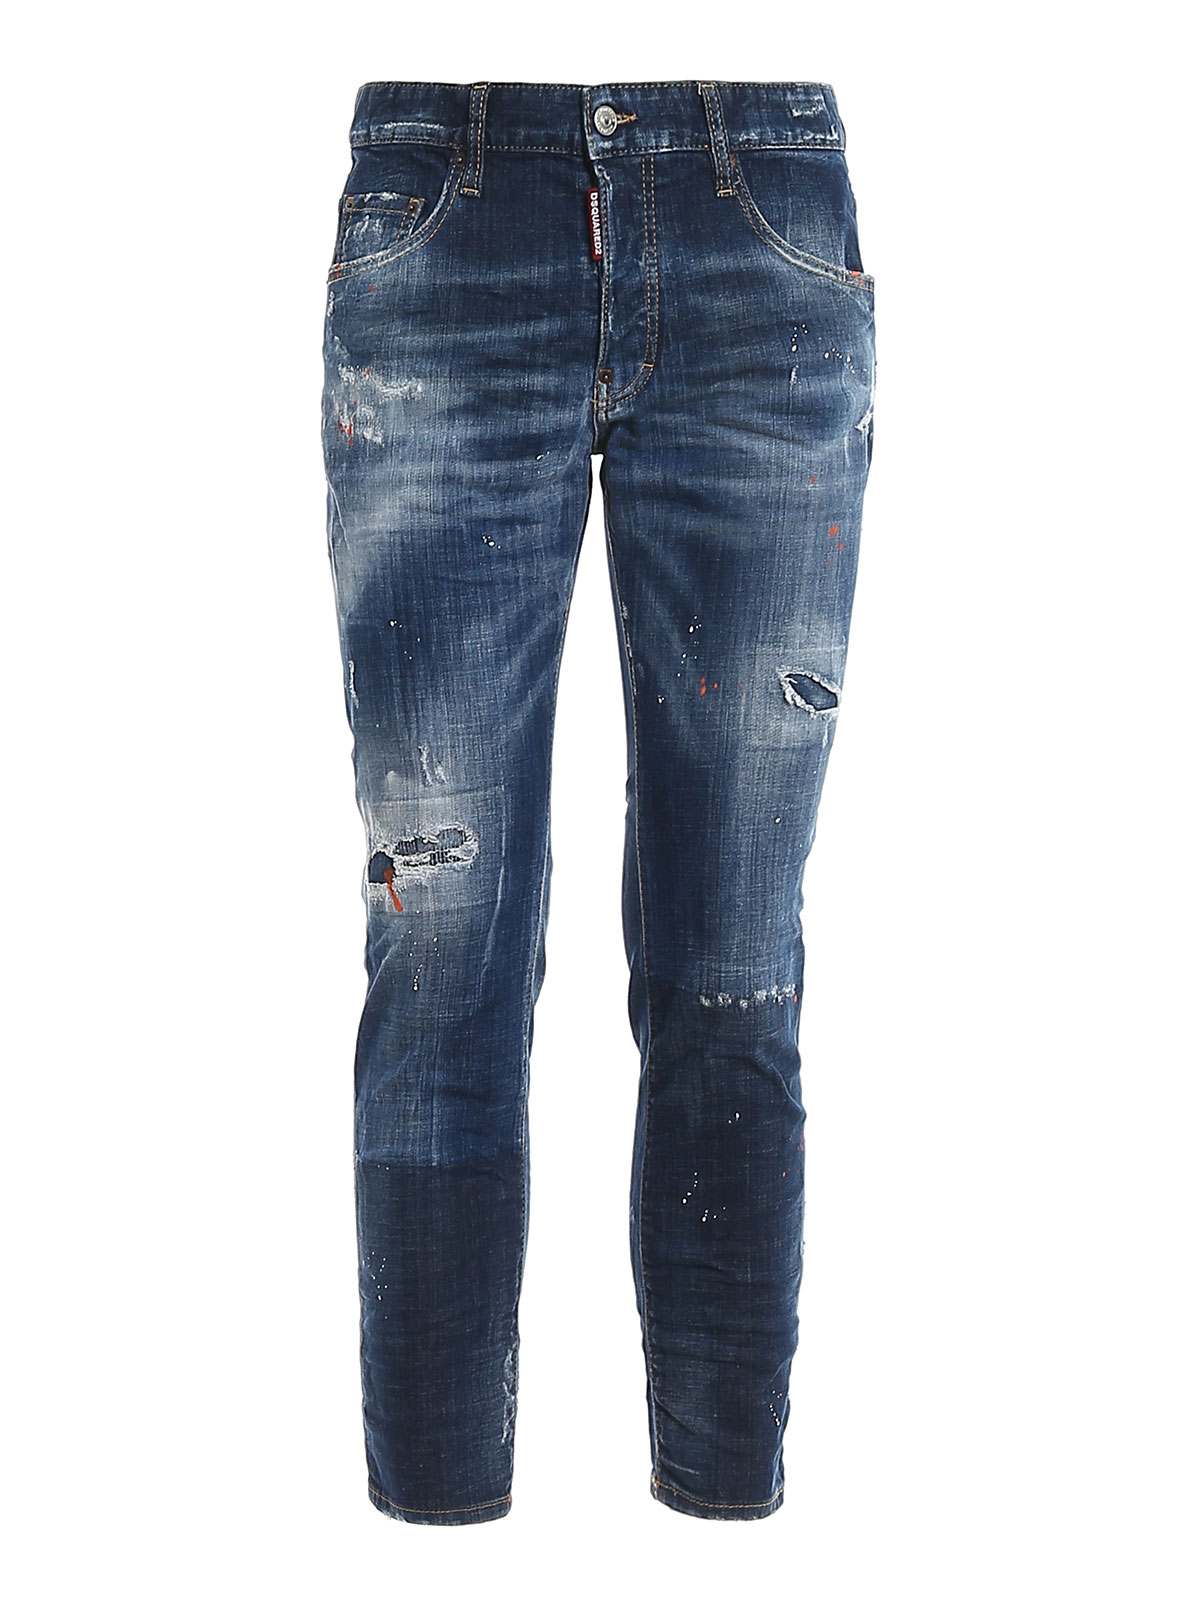 DSQUARED2 SKATER SPOTTED JEANS